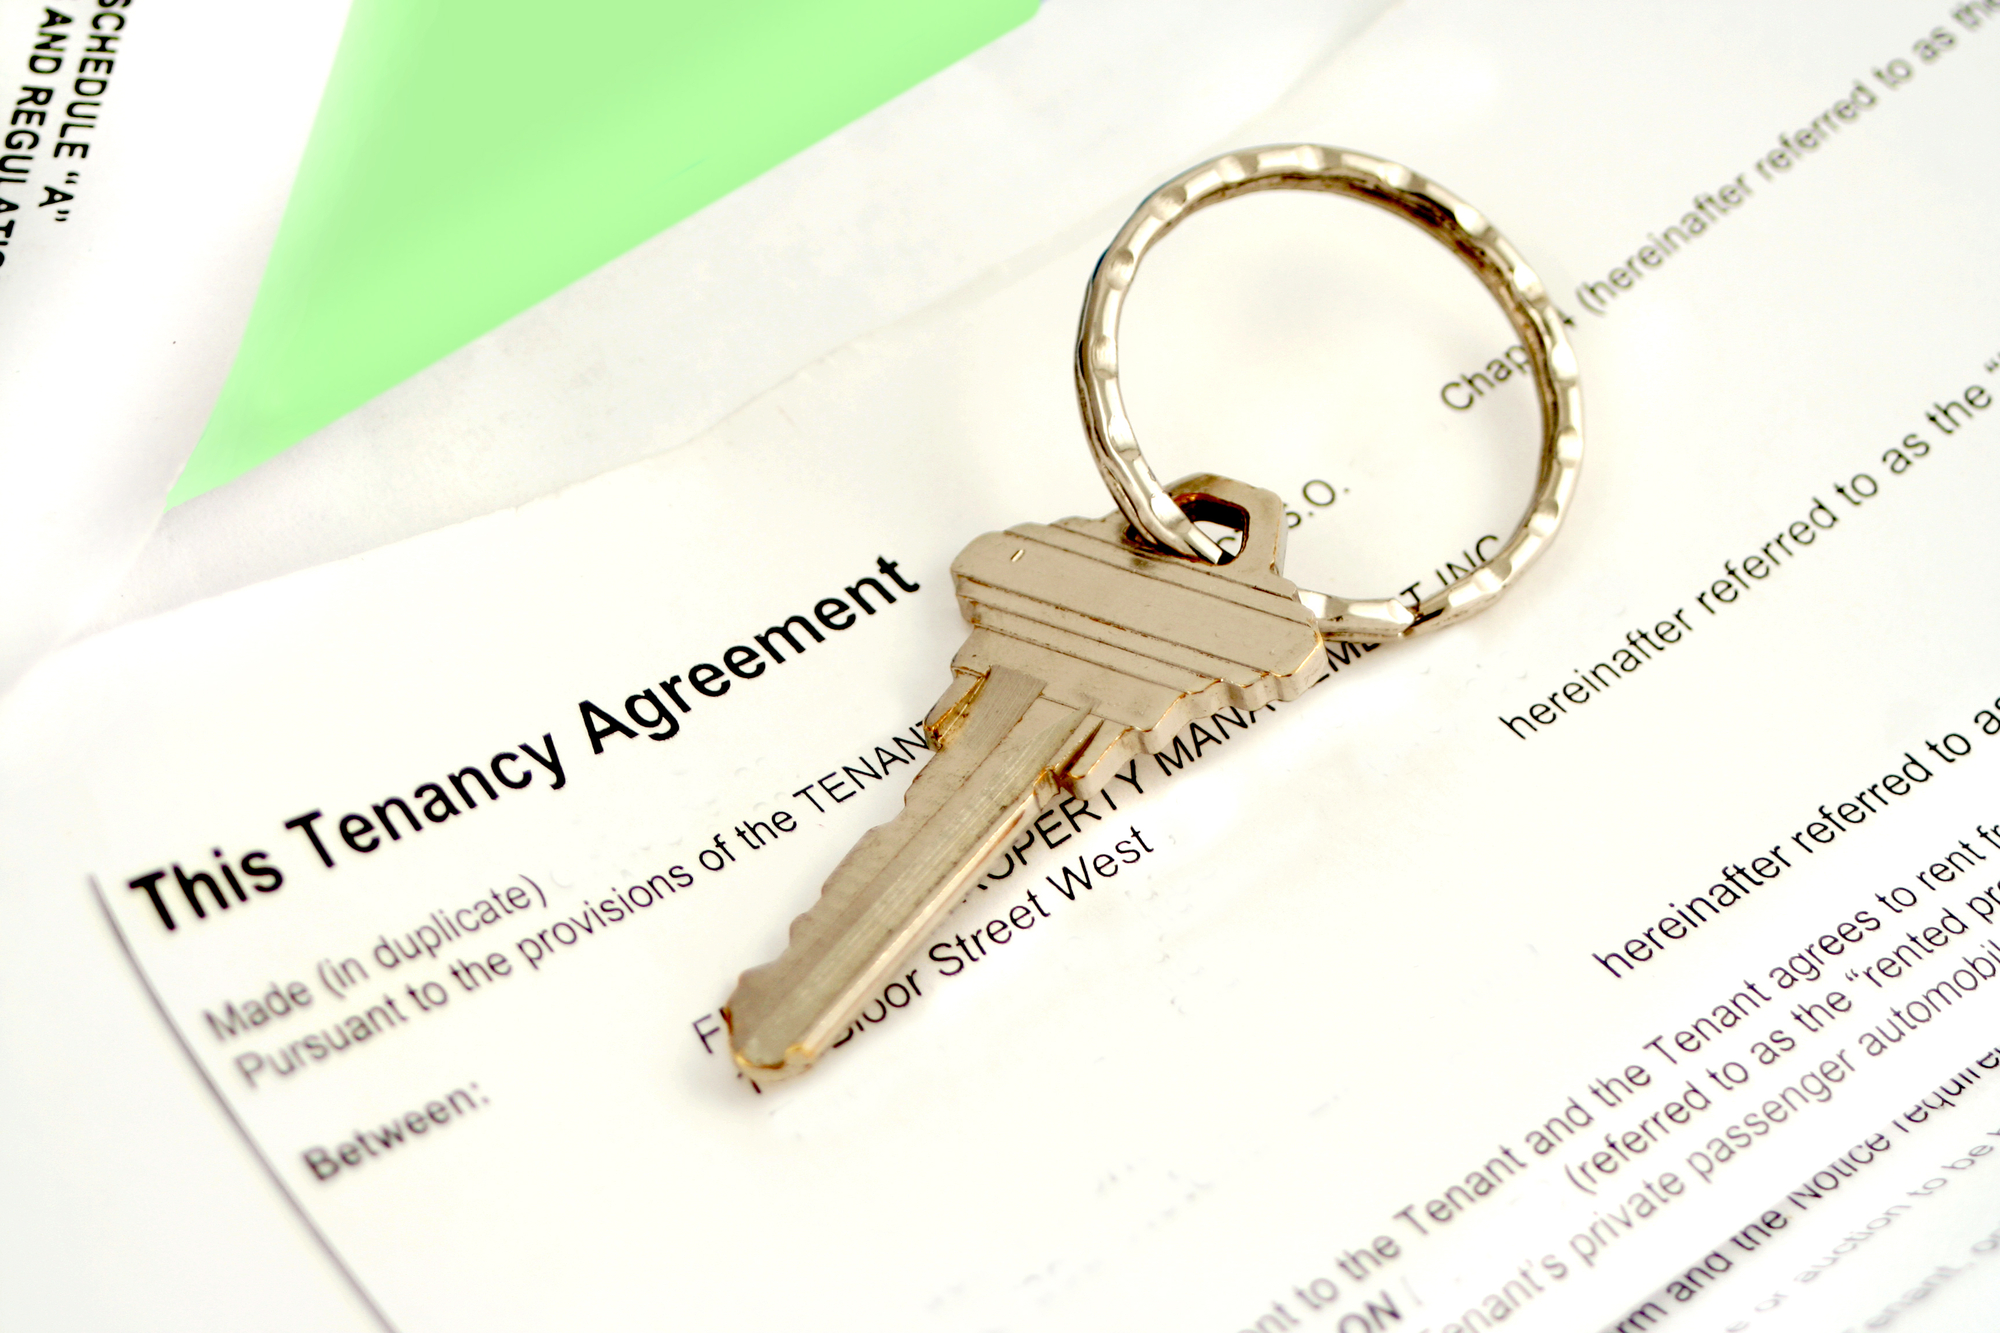 A key is sitting on top of a tenancy agreement.